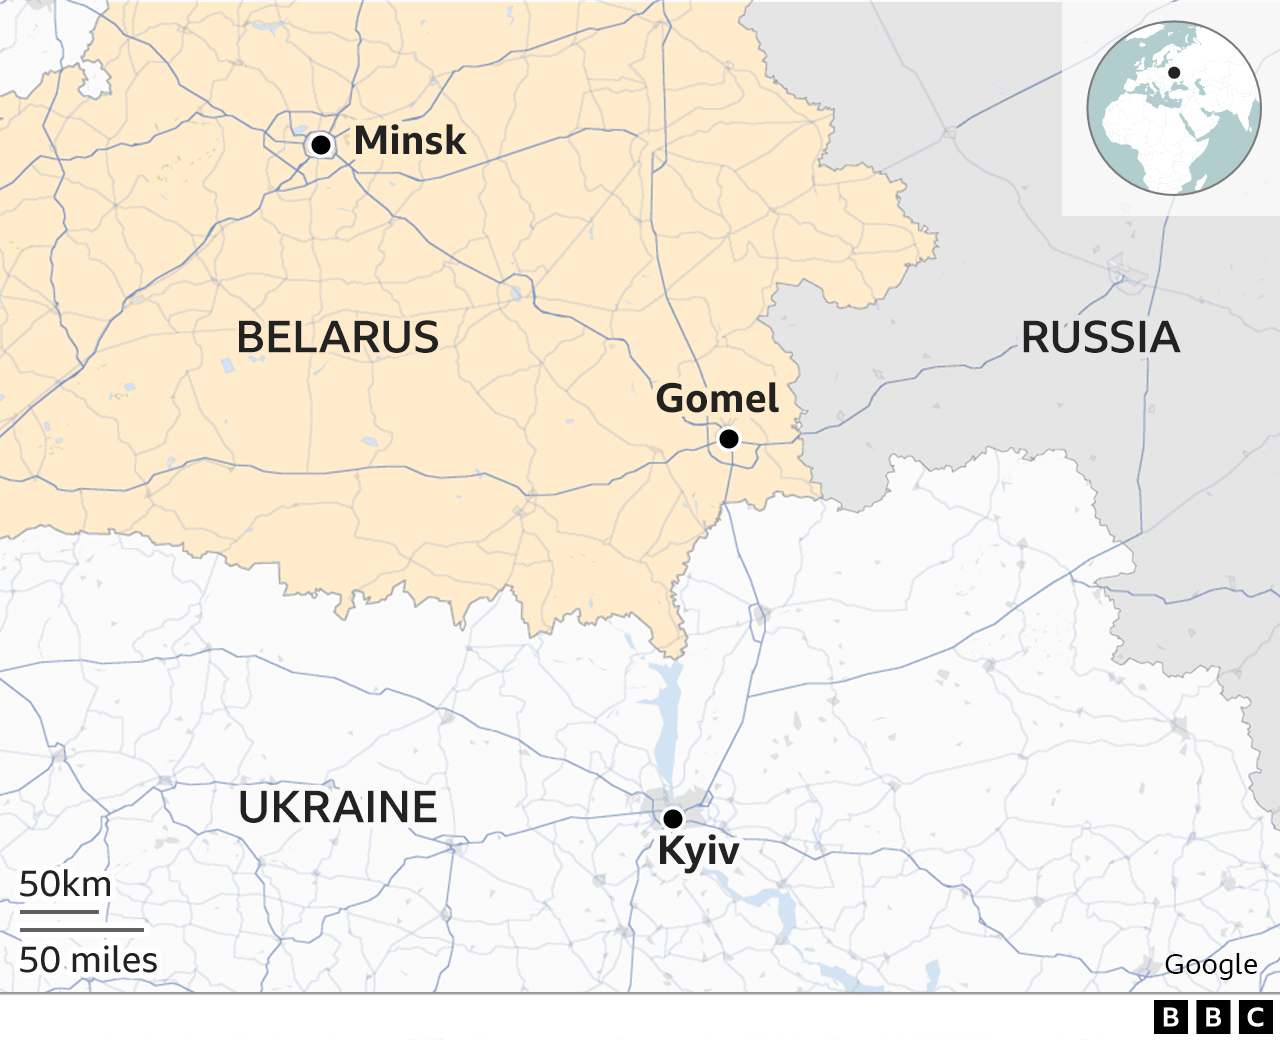 As yet analysts don't see any new build up of forces on Belarus's border with Ukraine